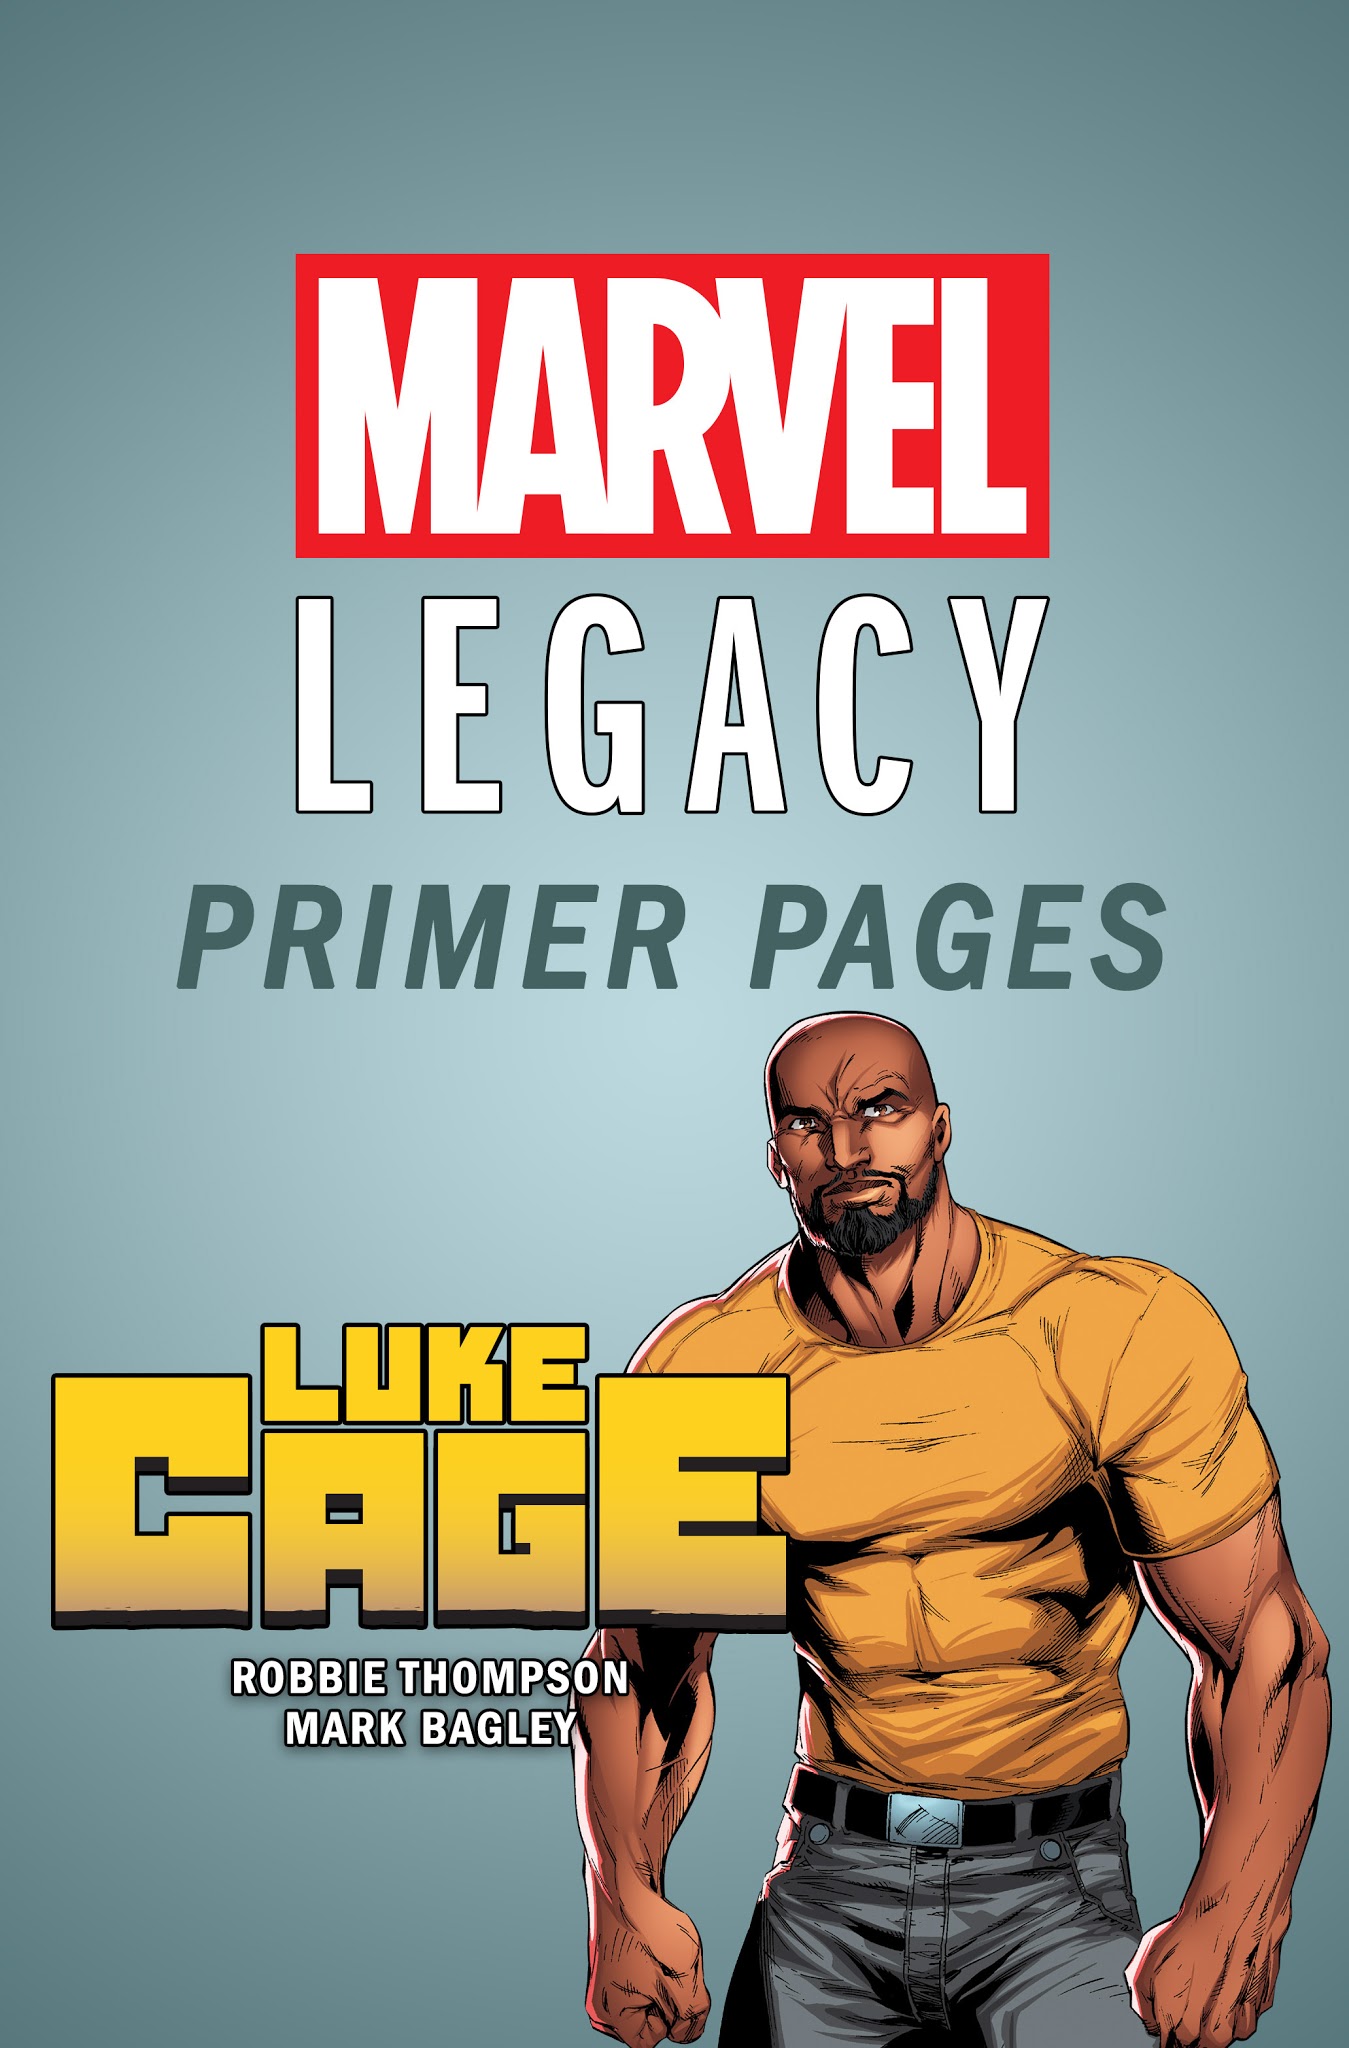 Read online Luke Cage comic -  Issue # Issue  - Marvel Legacy Primer Pages - 1